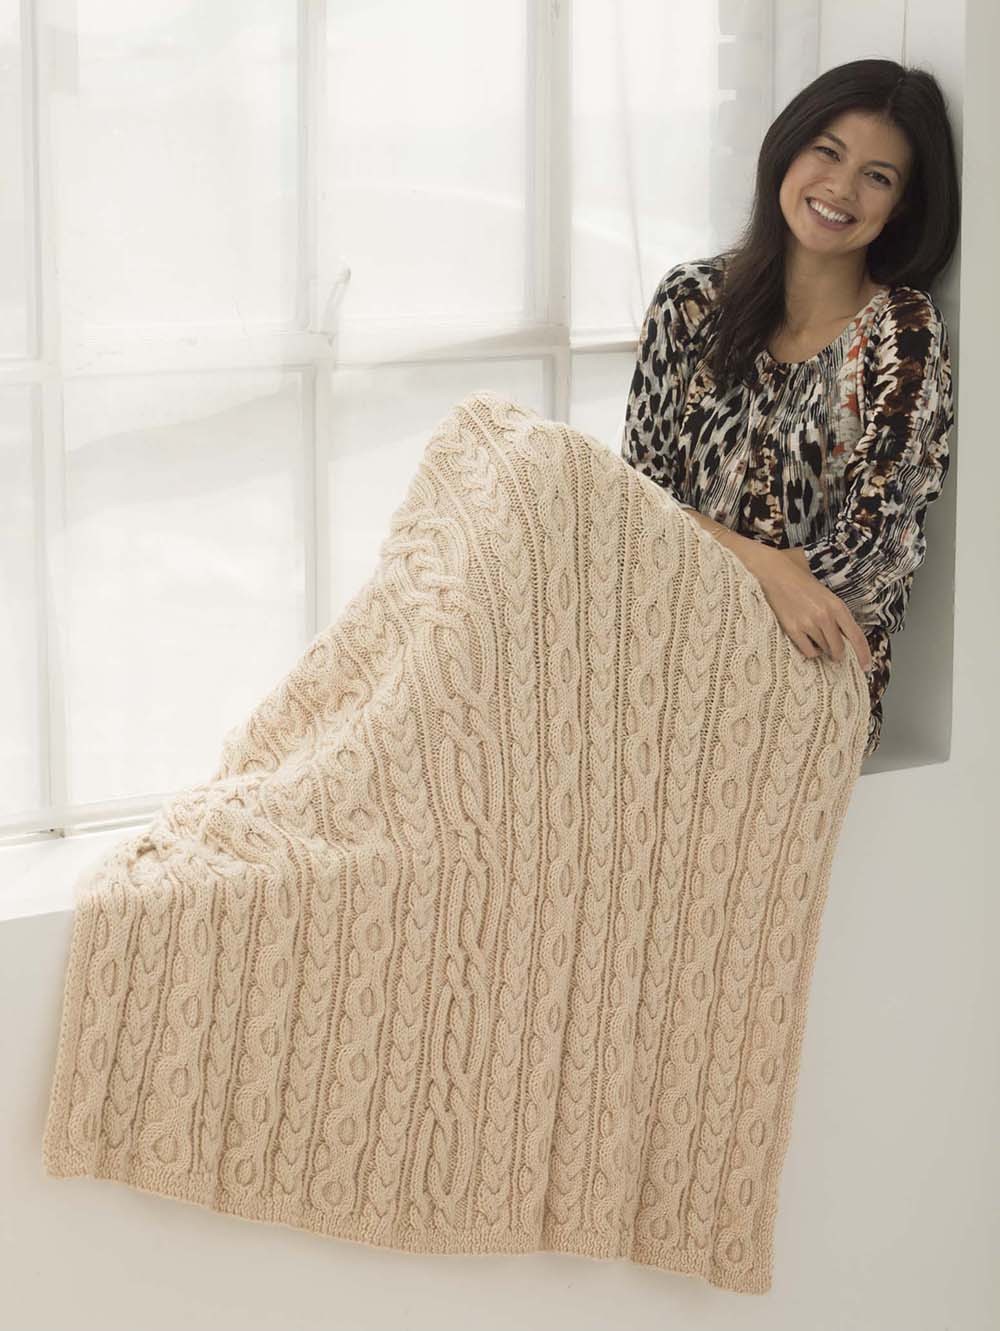 Dancing Cable Afghan Knit